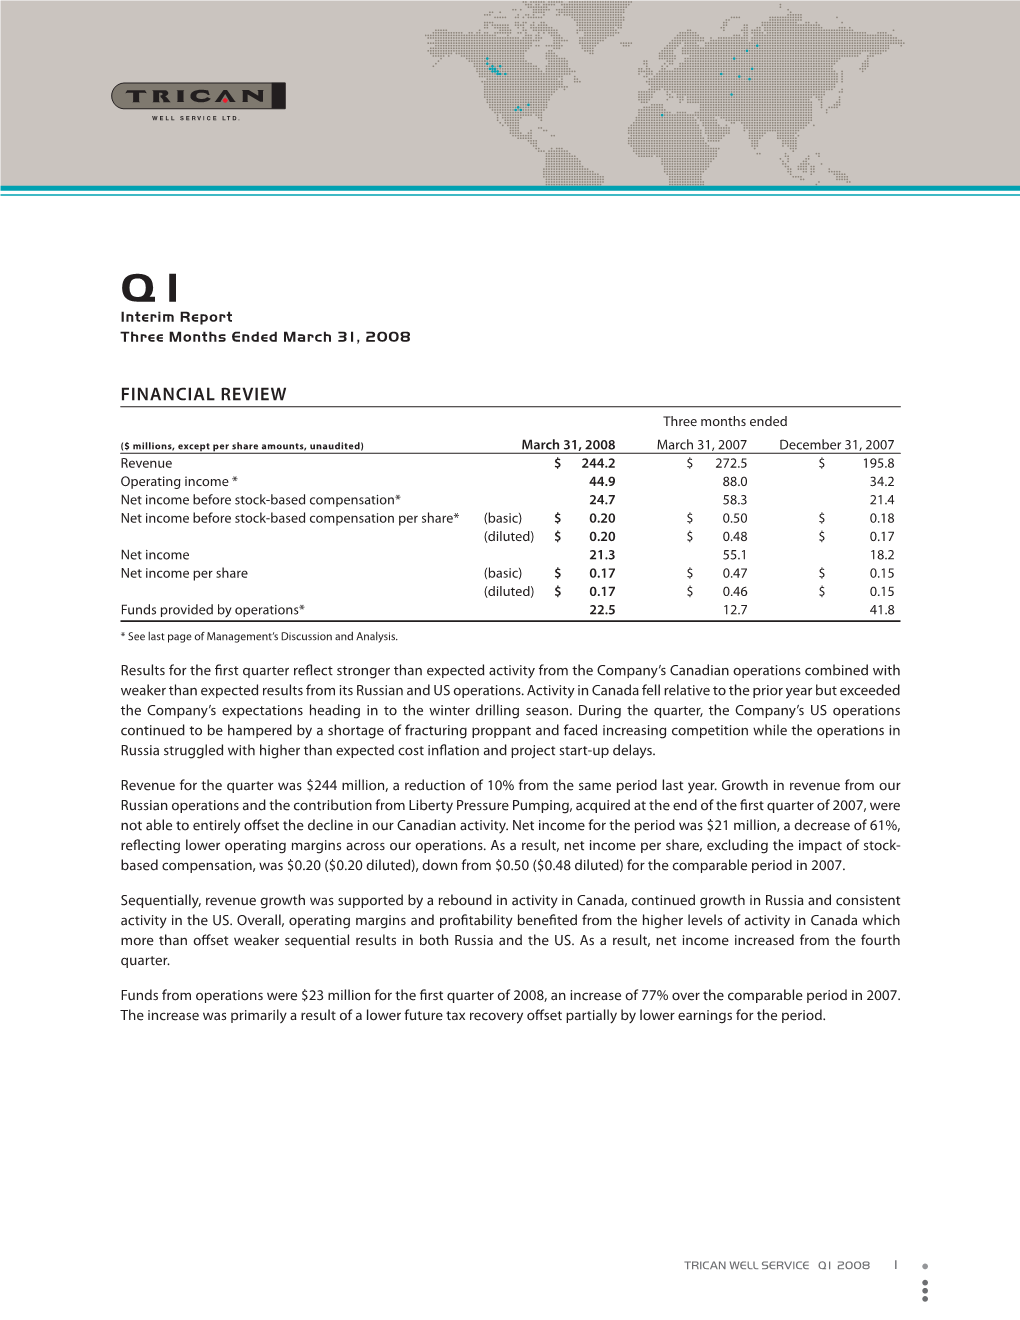 Q1 Interim Report Three Months Ended March 31, 2008